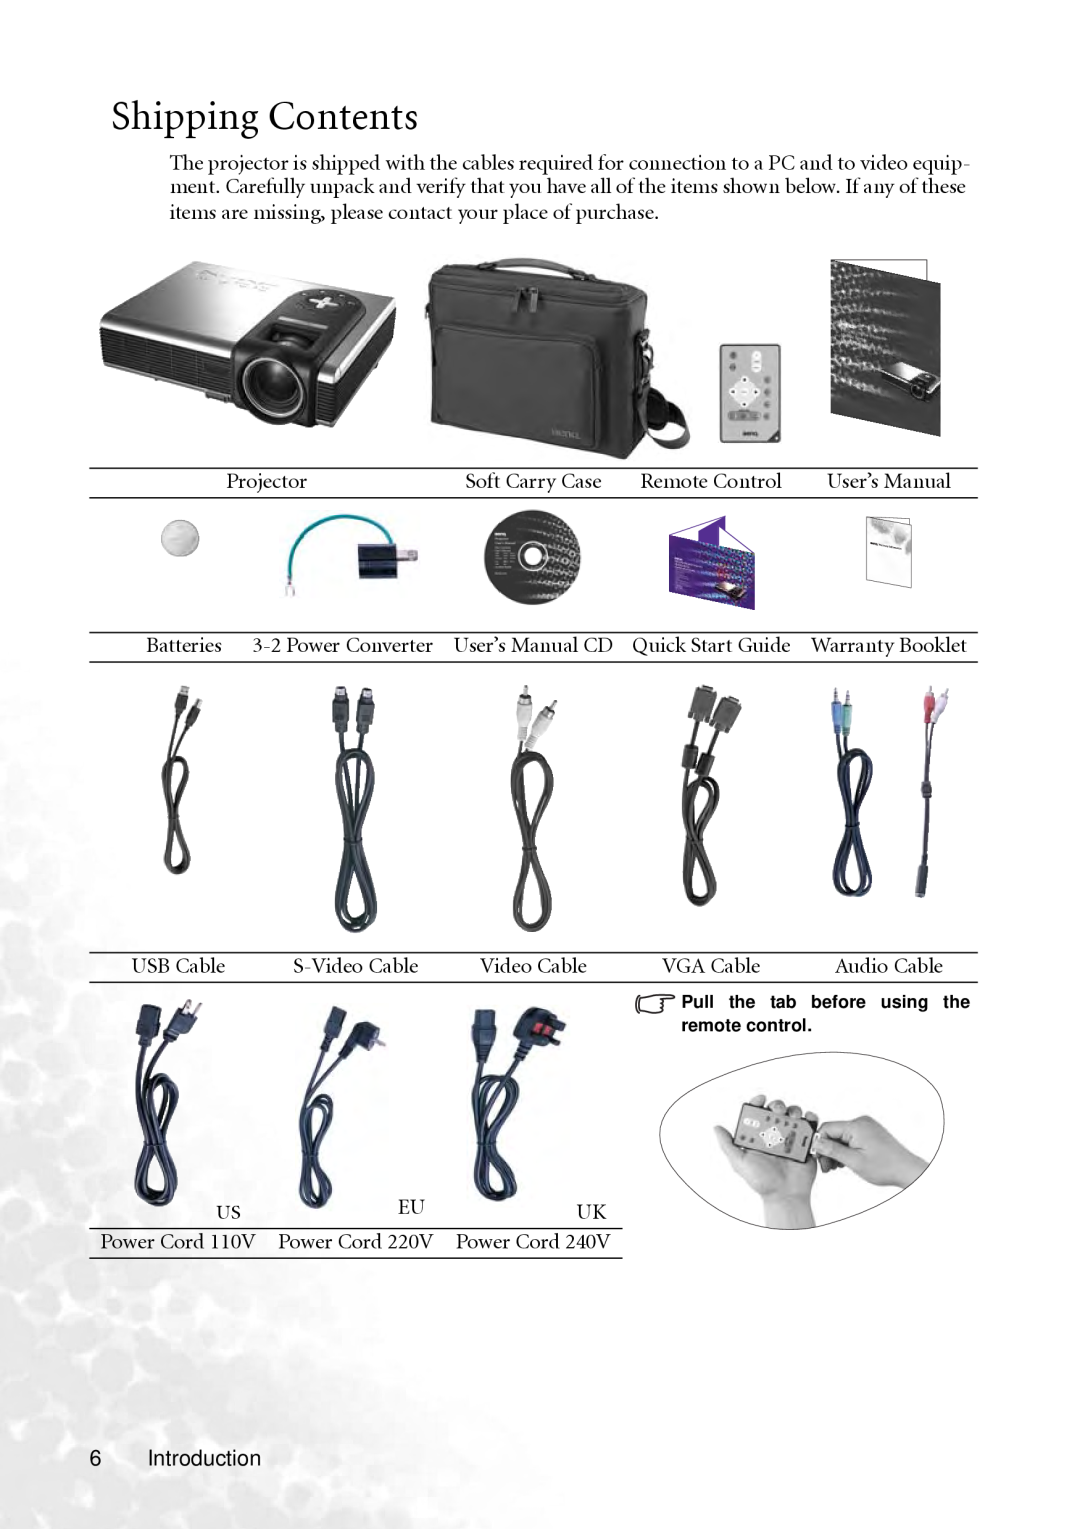 BenQ PB2240 user manual Shipping Contents, User’s Manual CD, Warranty Booklet, Power Cord 